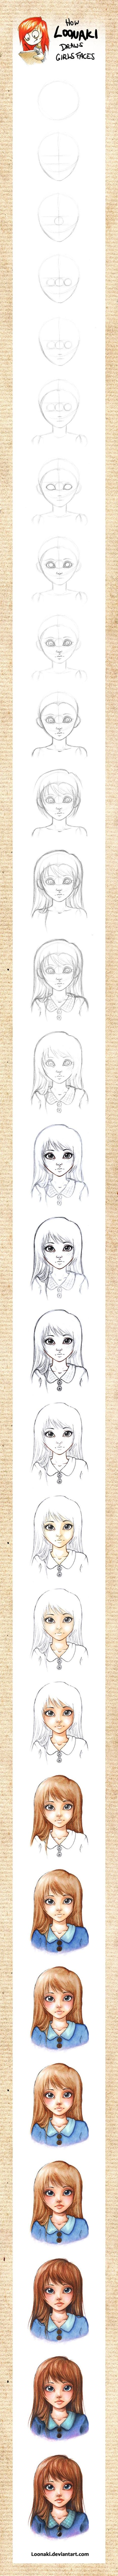 How To Draw Girls Faces | Drawing References and Resources | Scoop.it